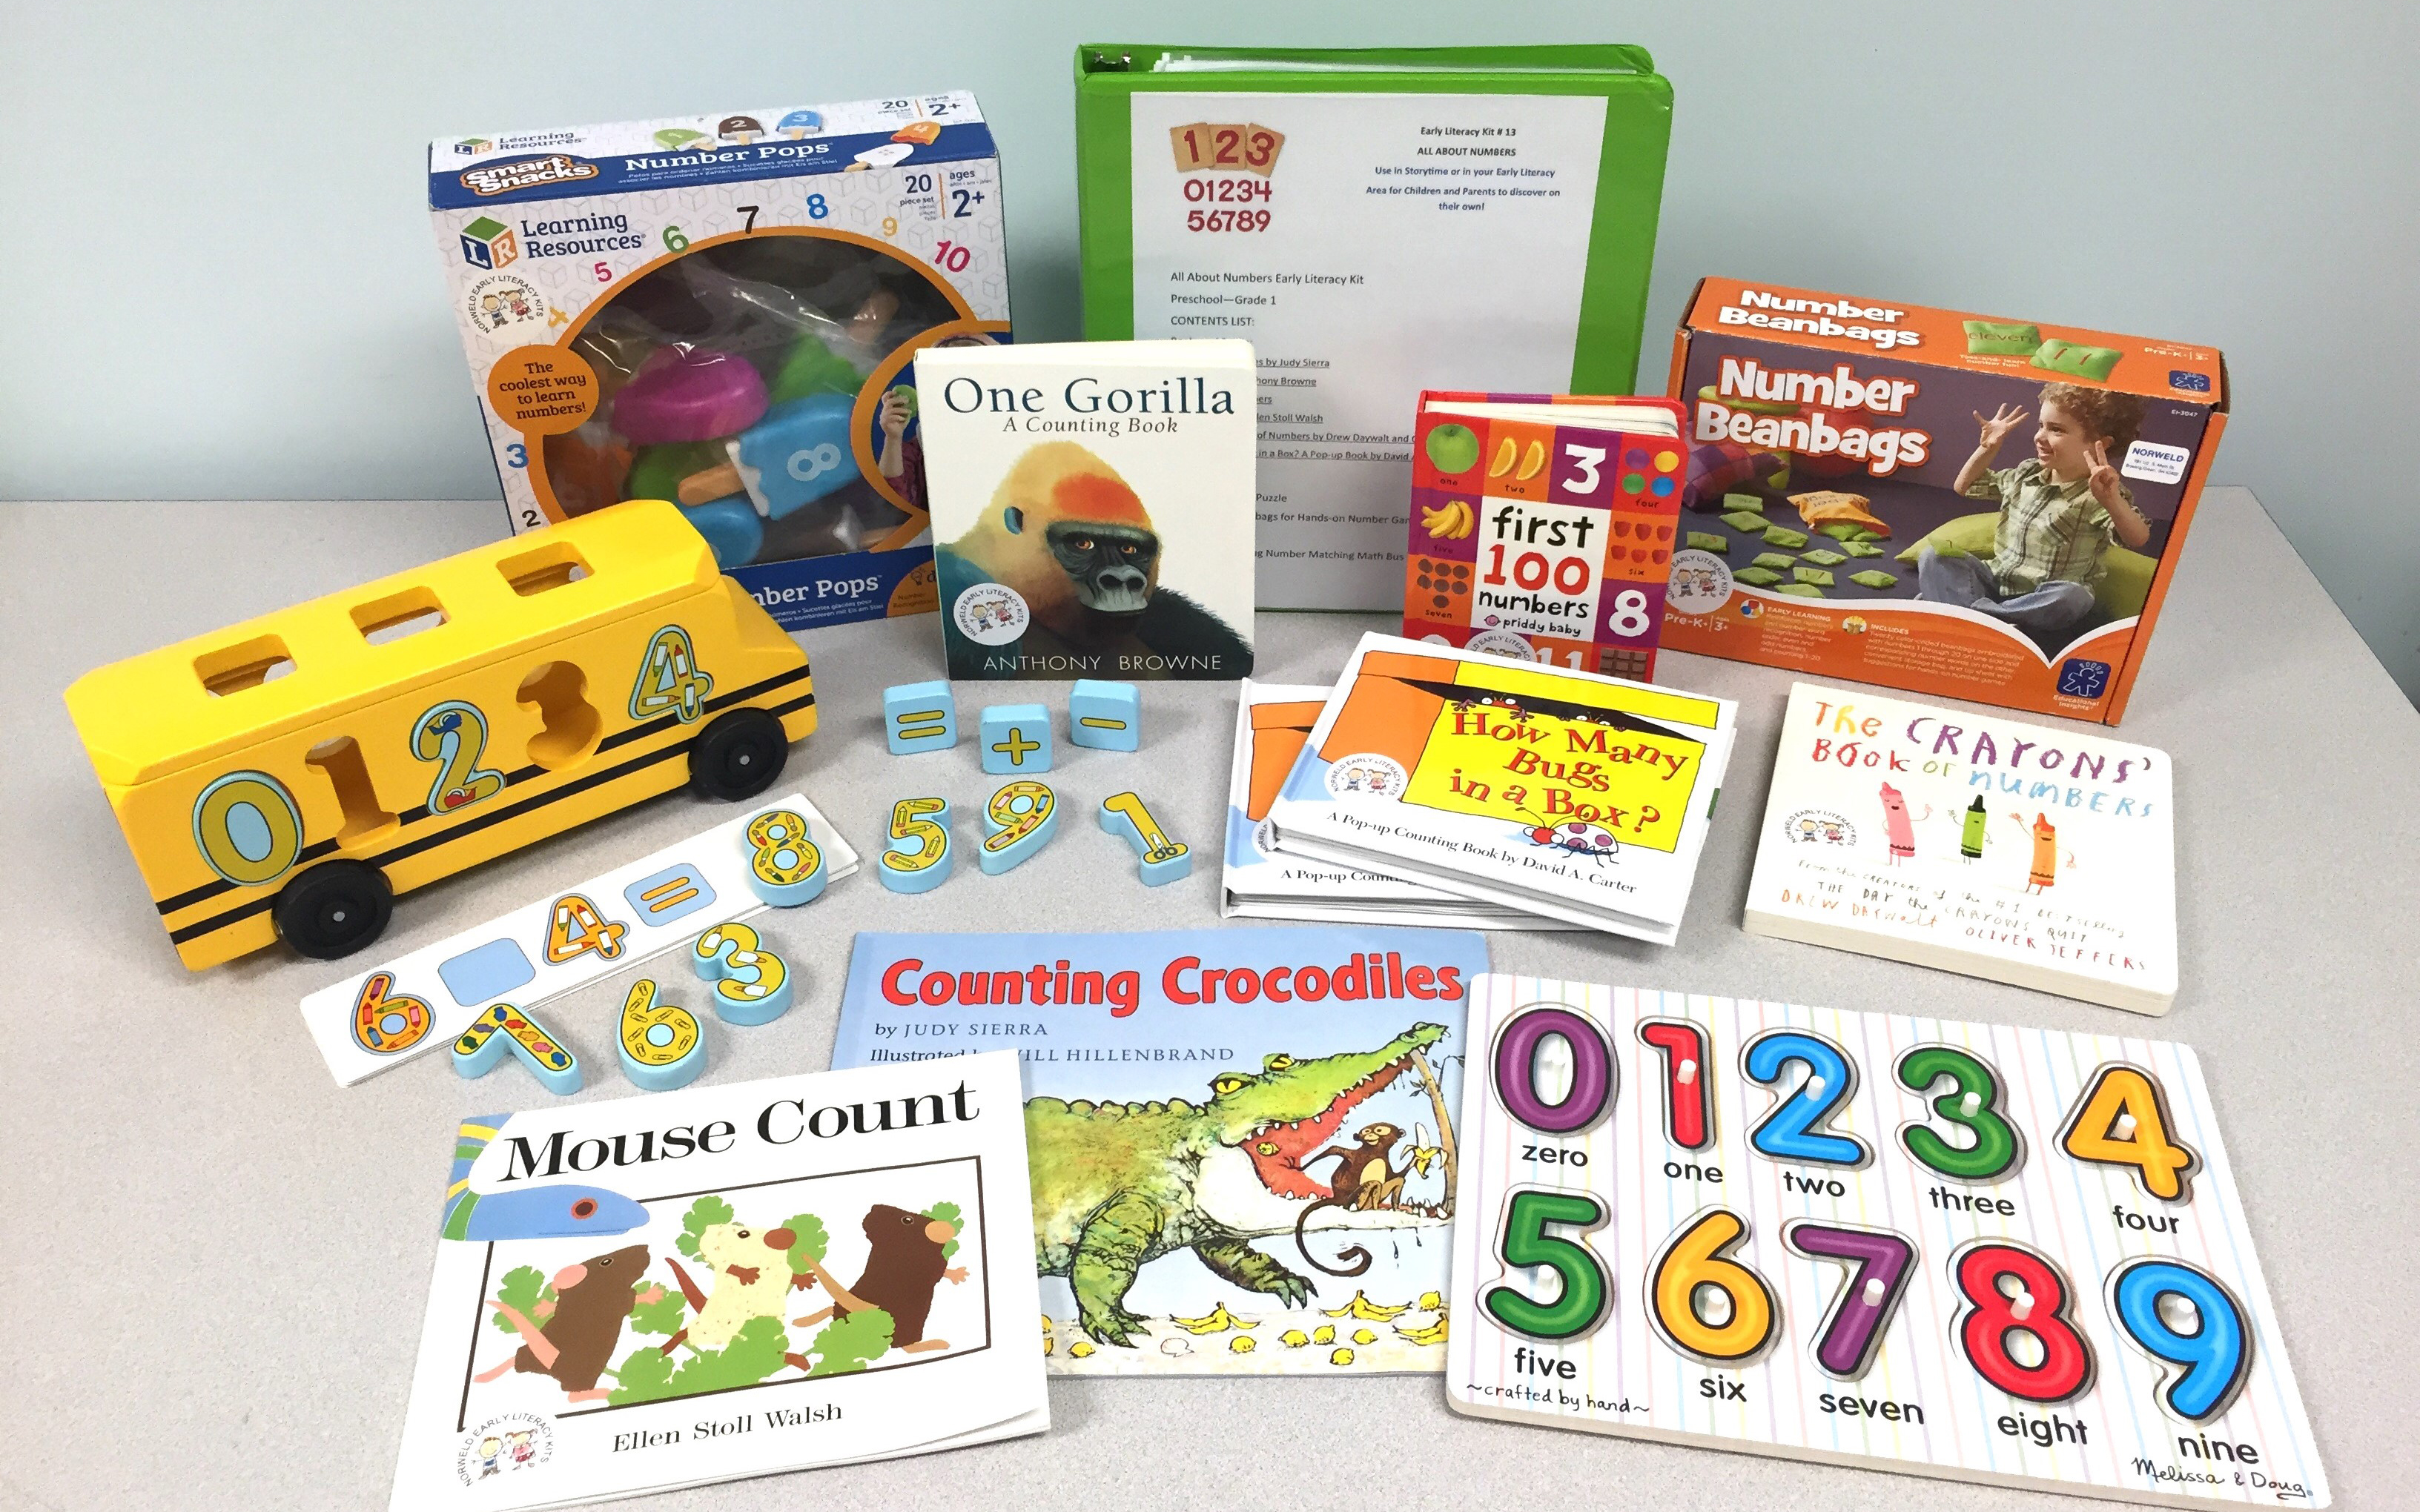 Contents of the All About Number Early Literacy Kit